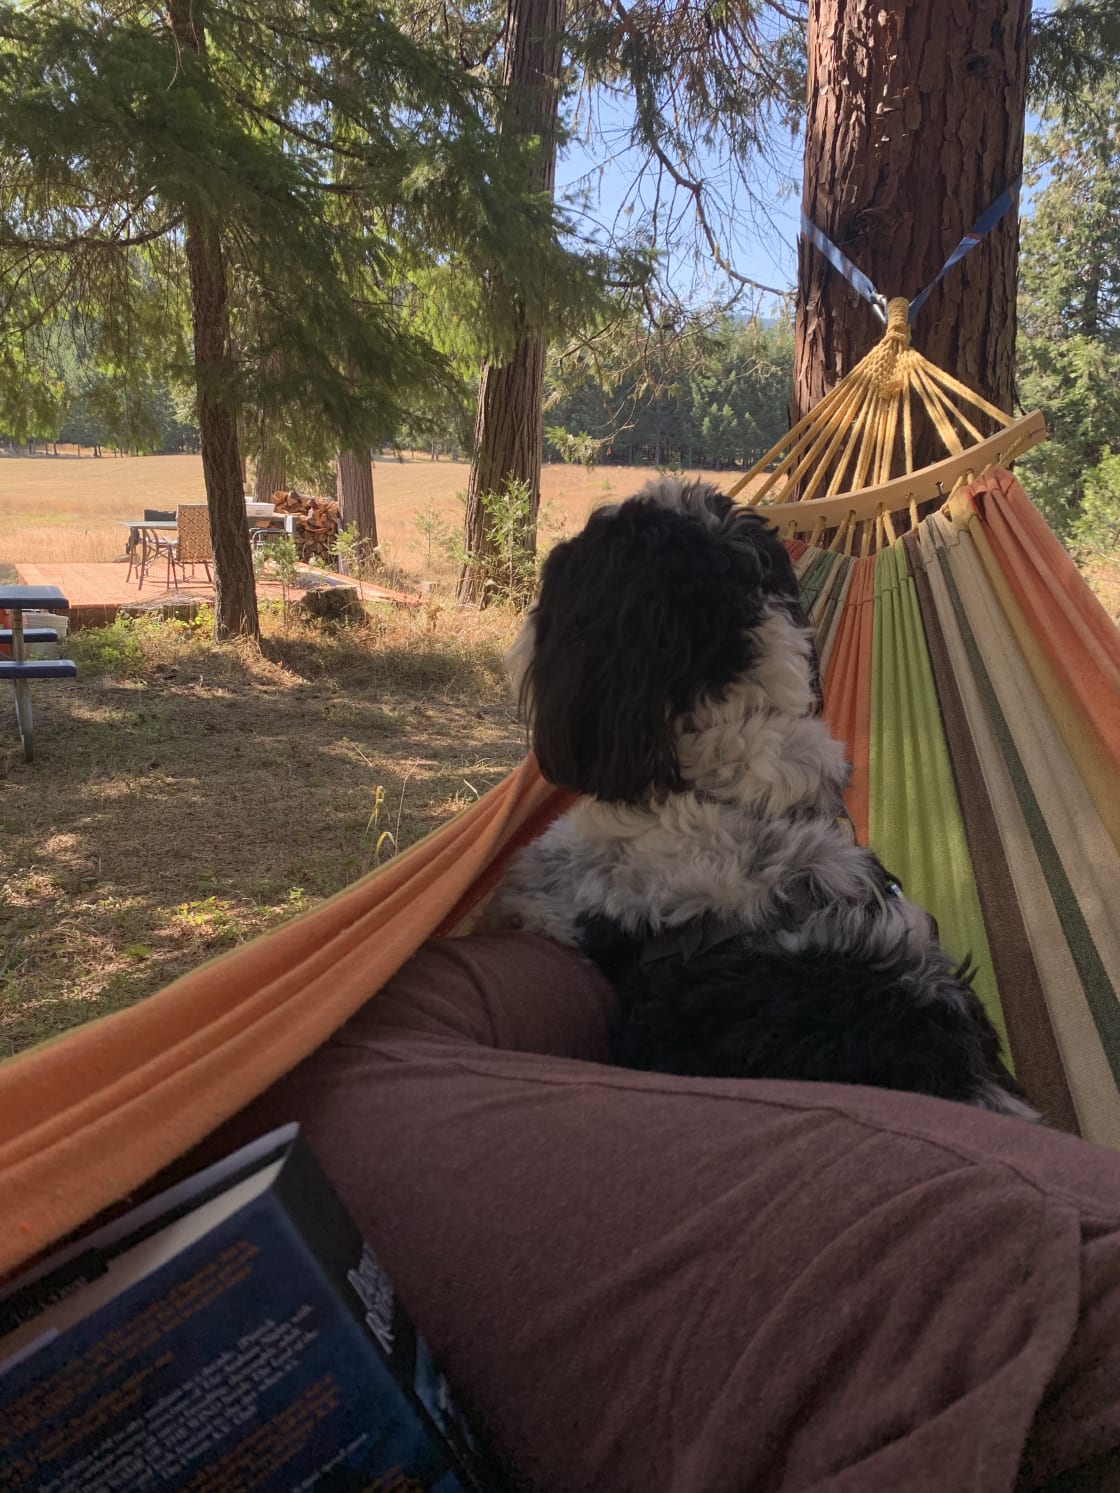 Hammock time is one of the best parts of camping!